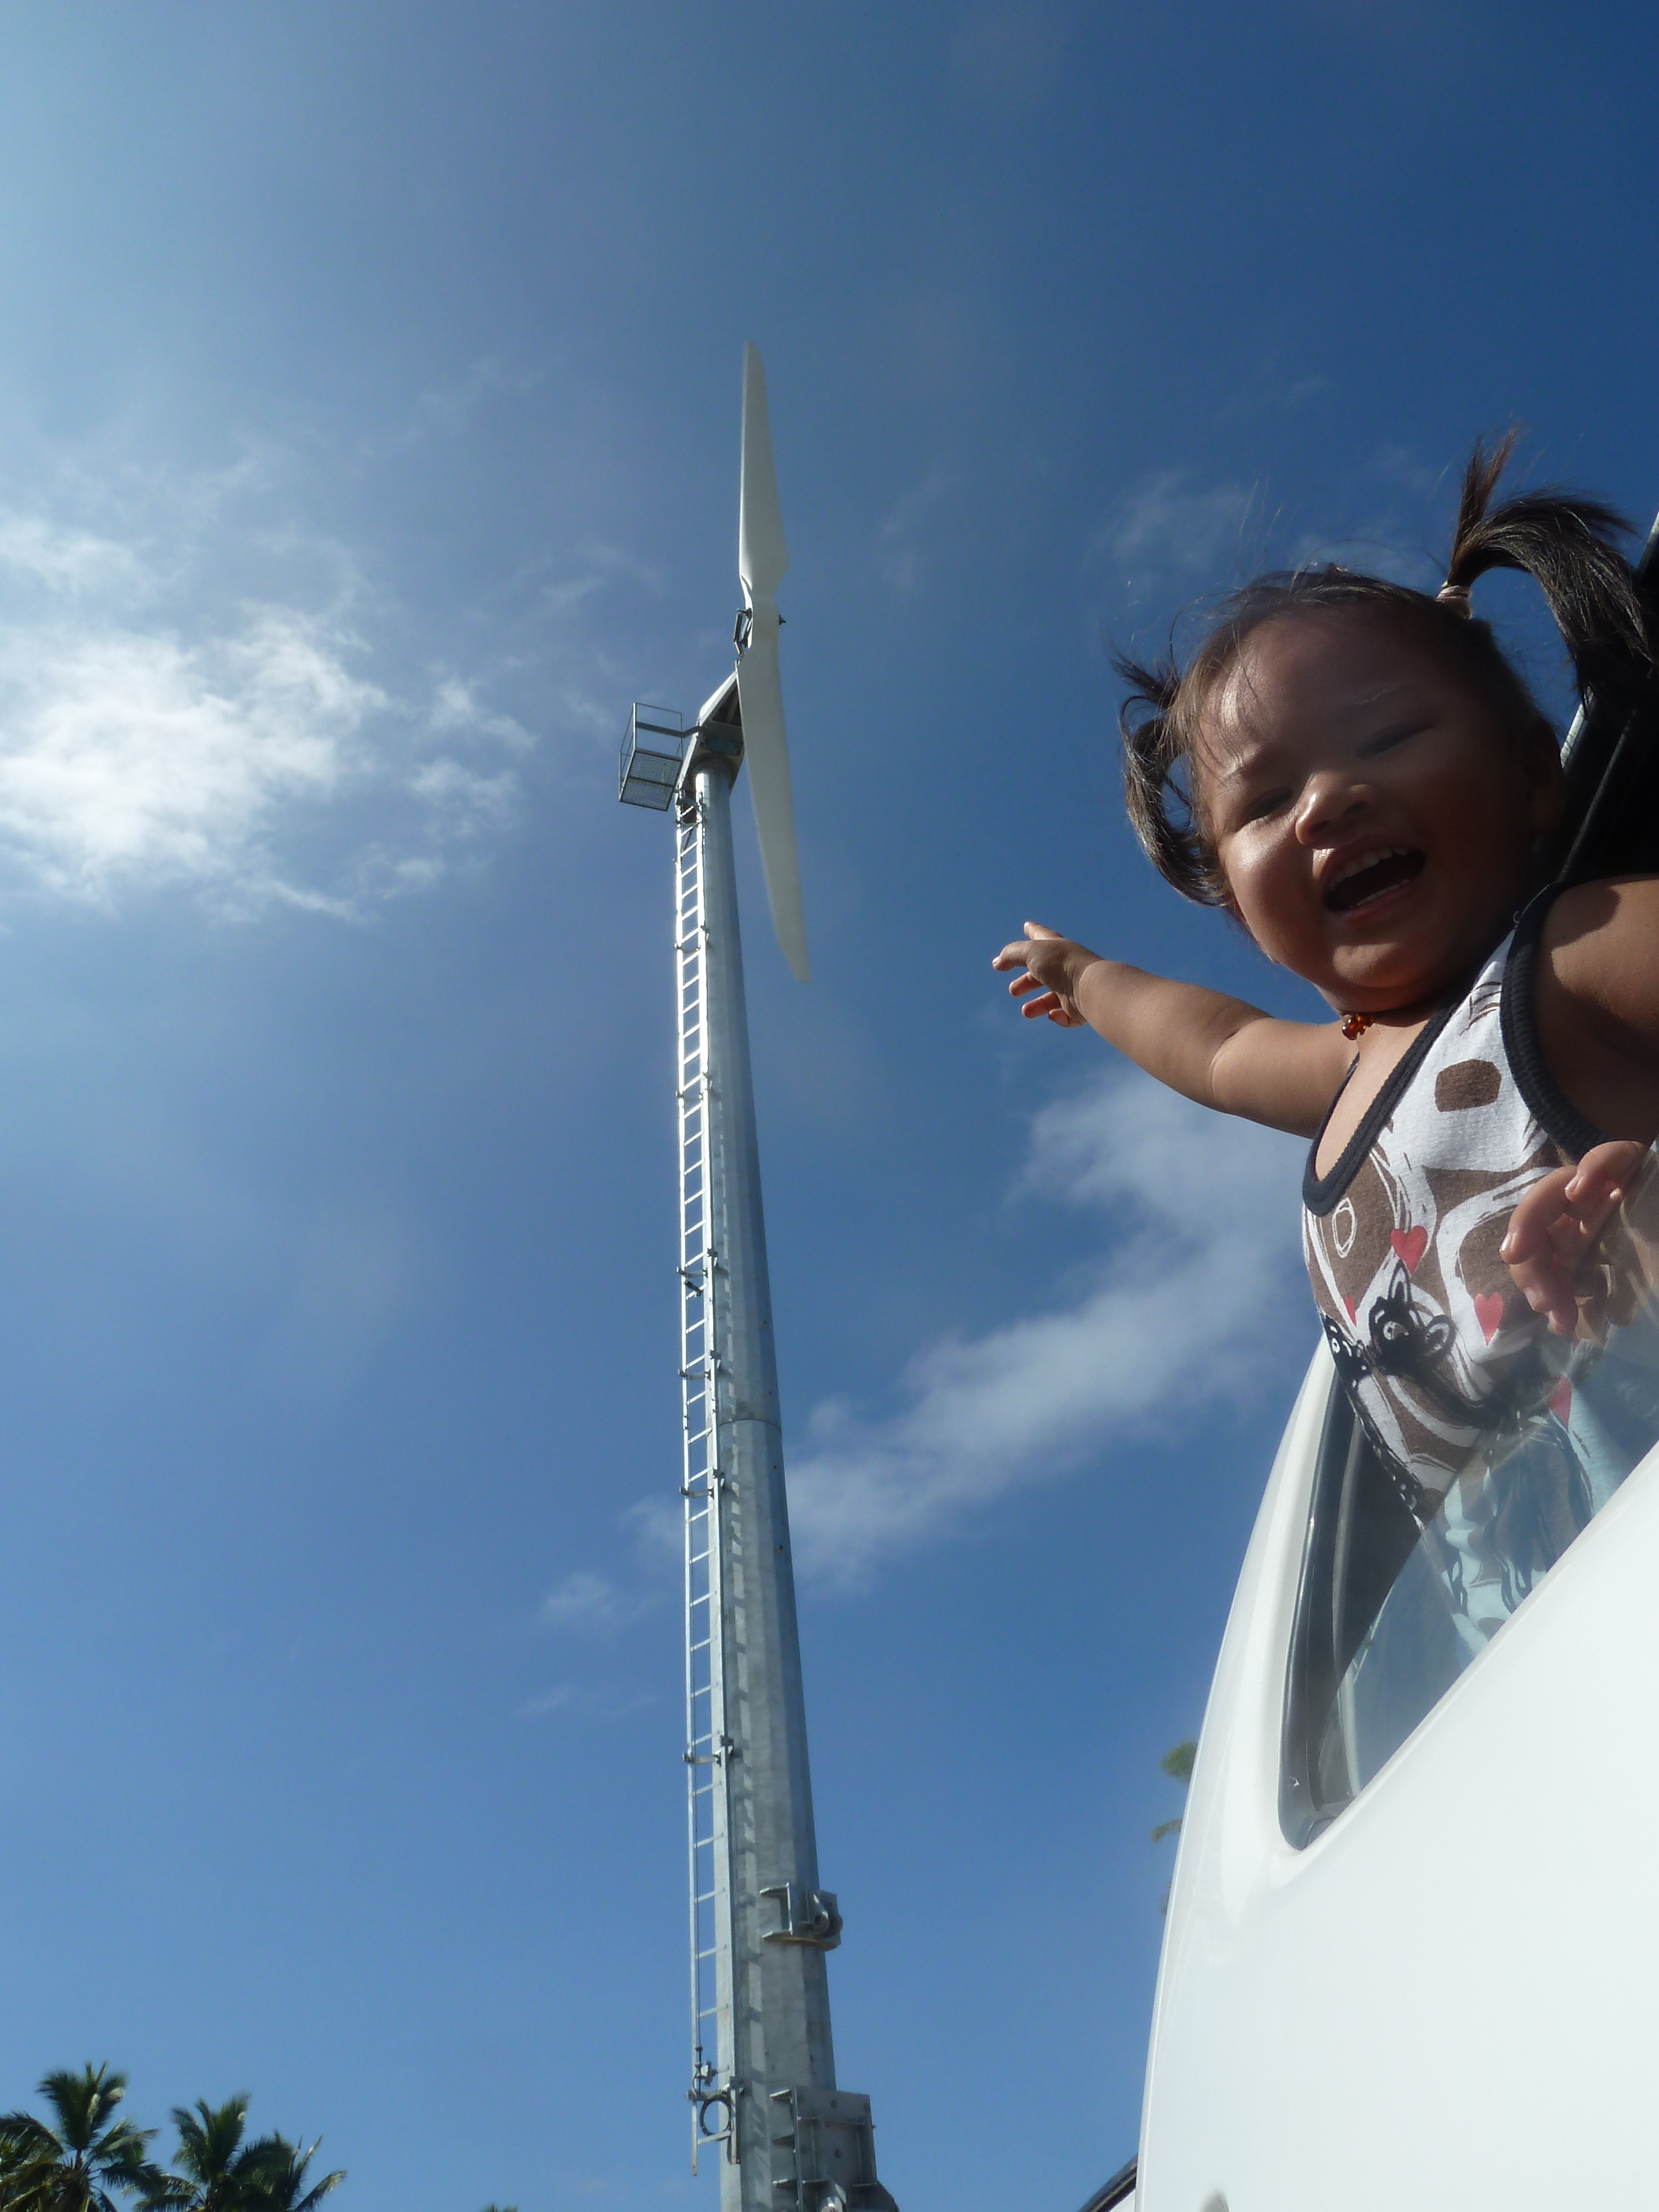 •	Two year Old Christine Seti is the Tongan Project manager’s daughter and she is delighted with the new turbine